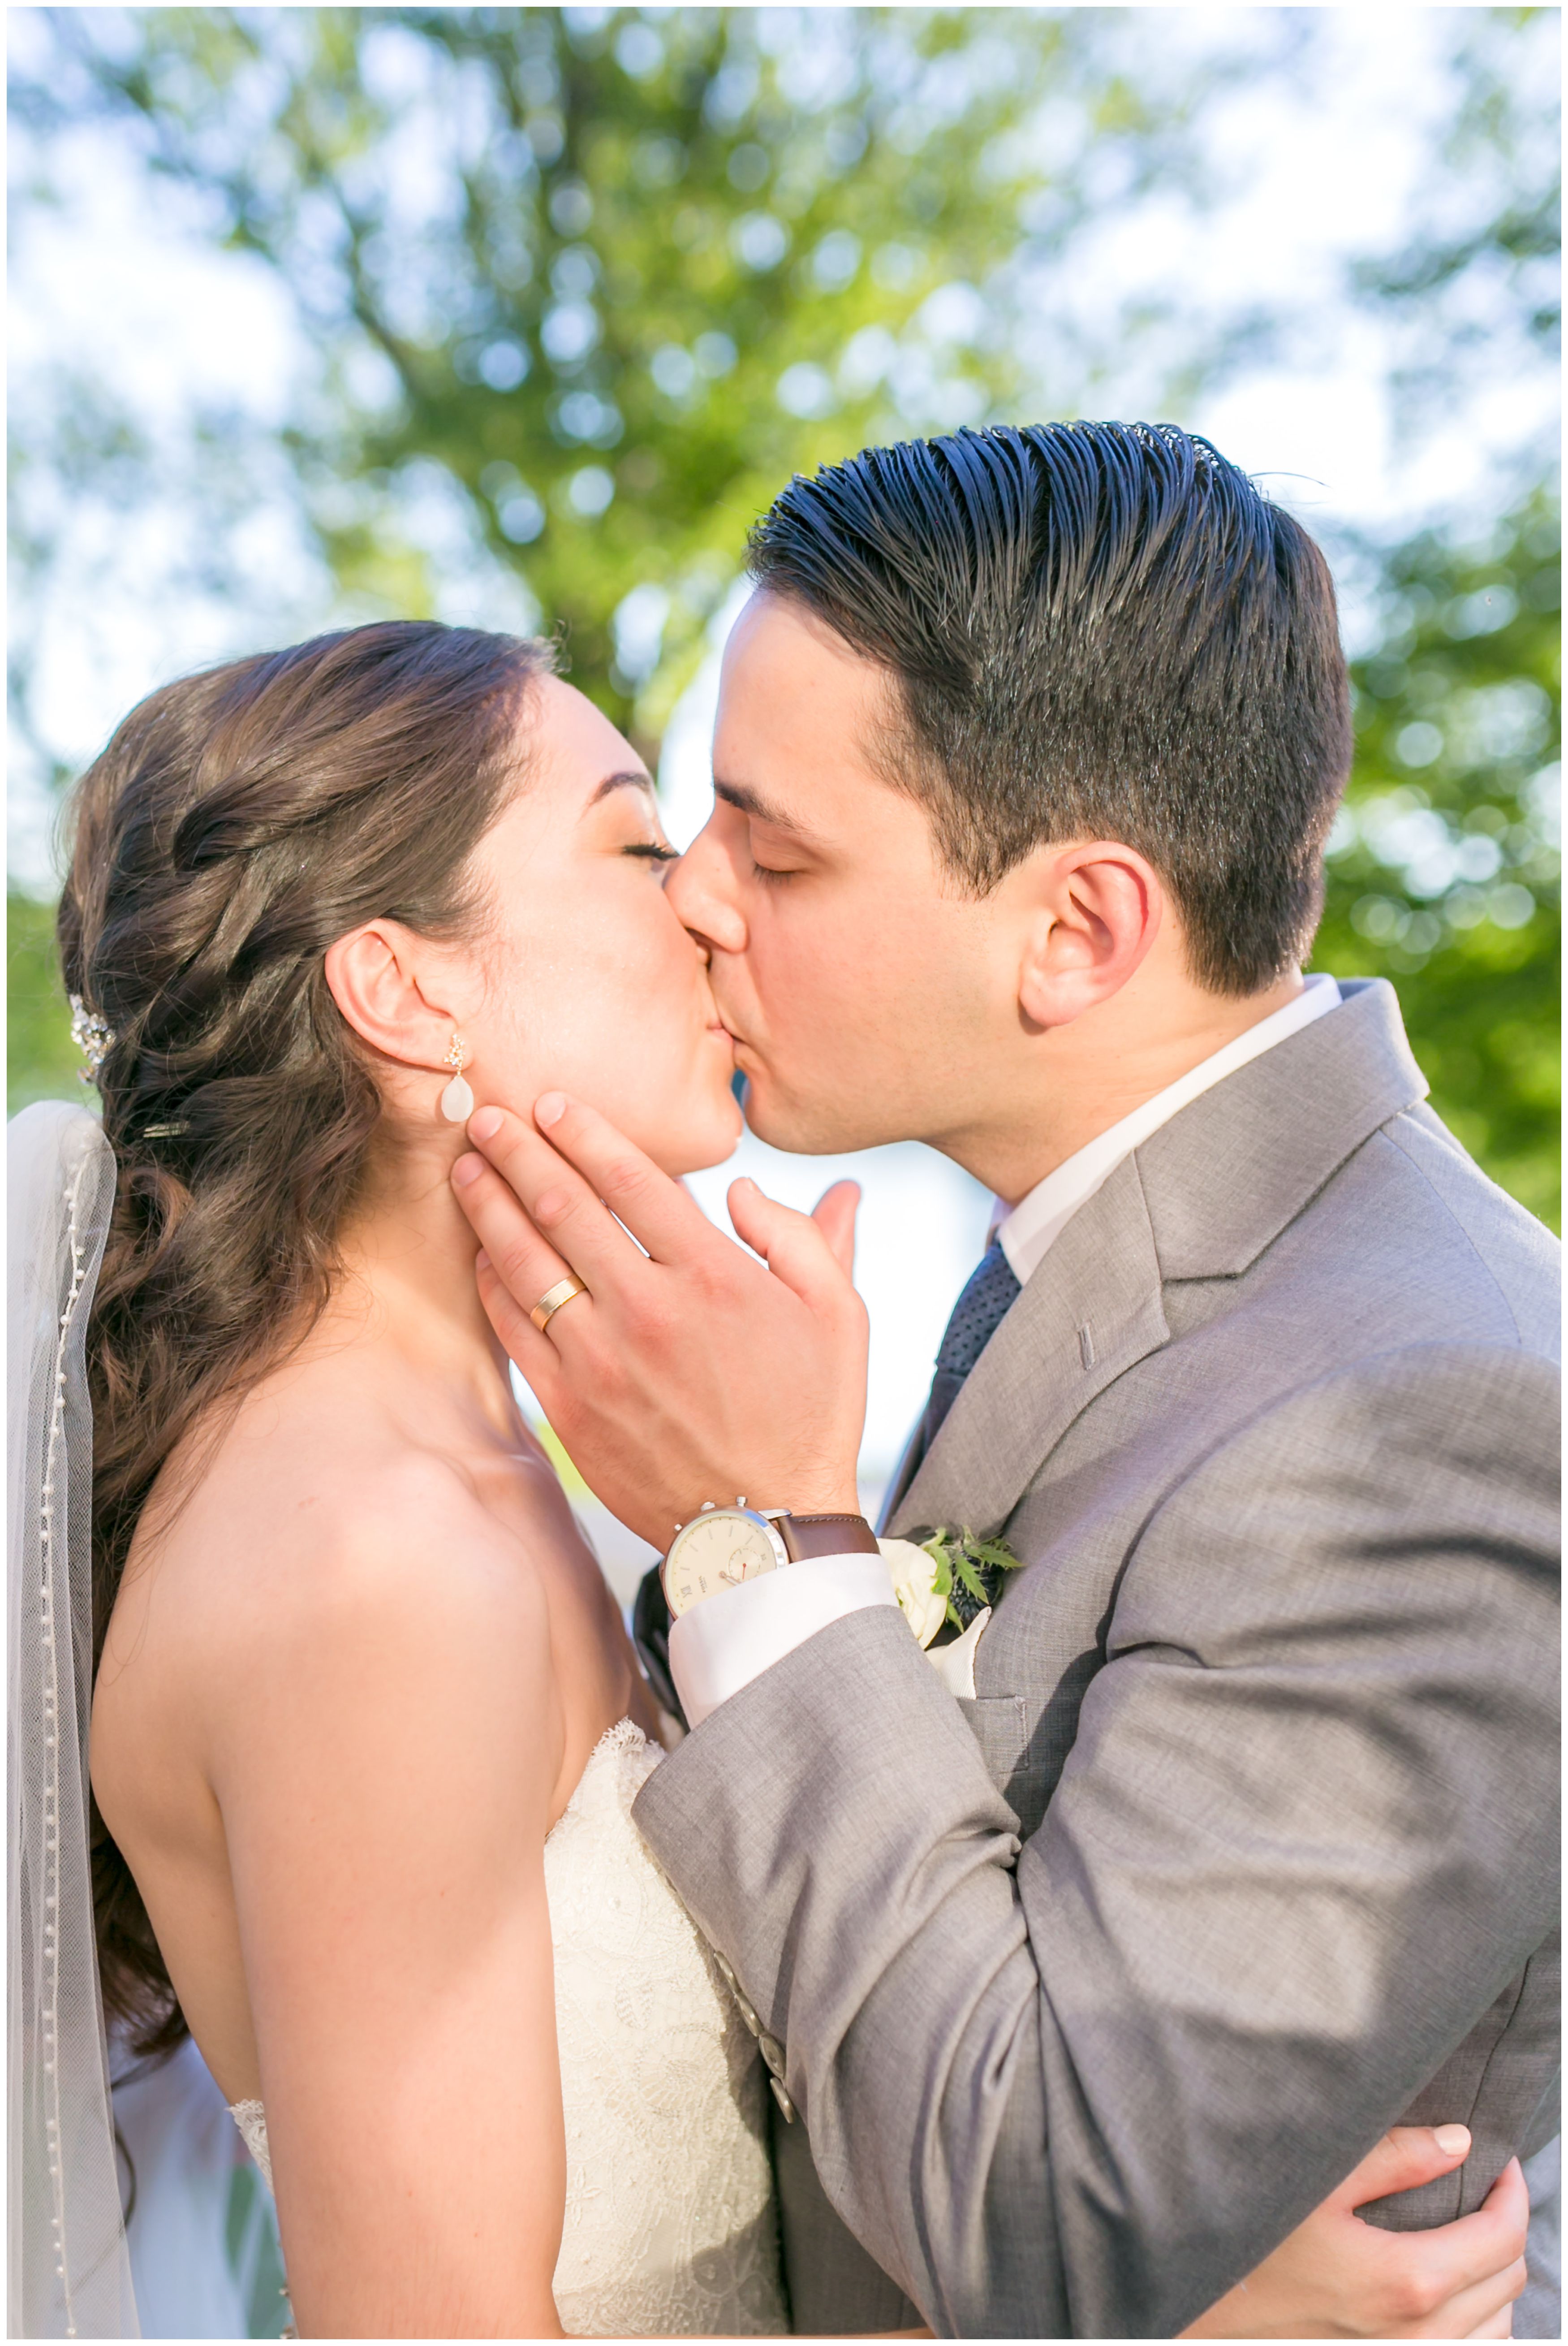 Bride and groom portrait kiss at outdoor lakeside wedding